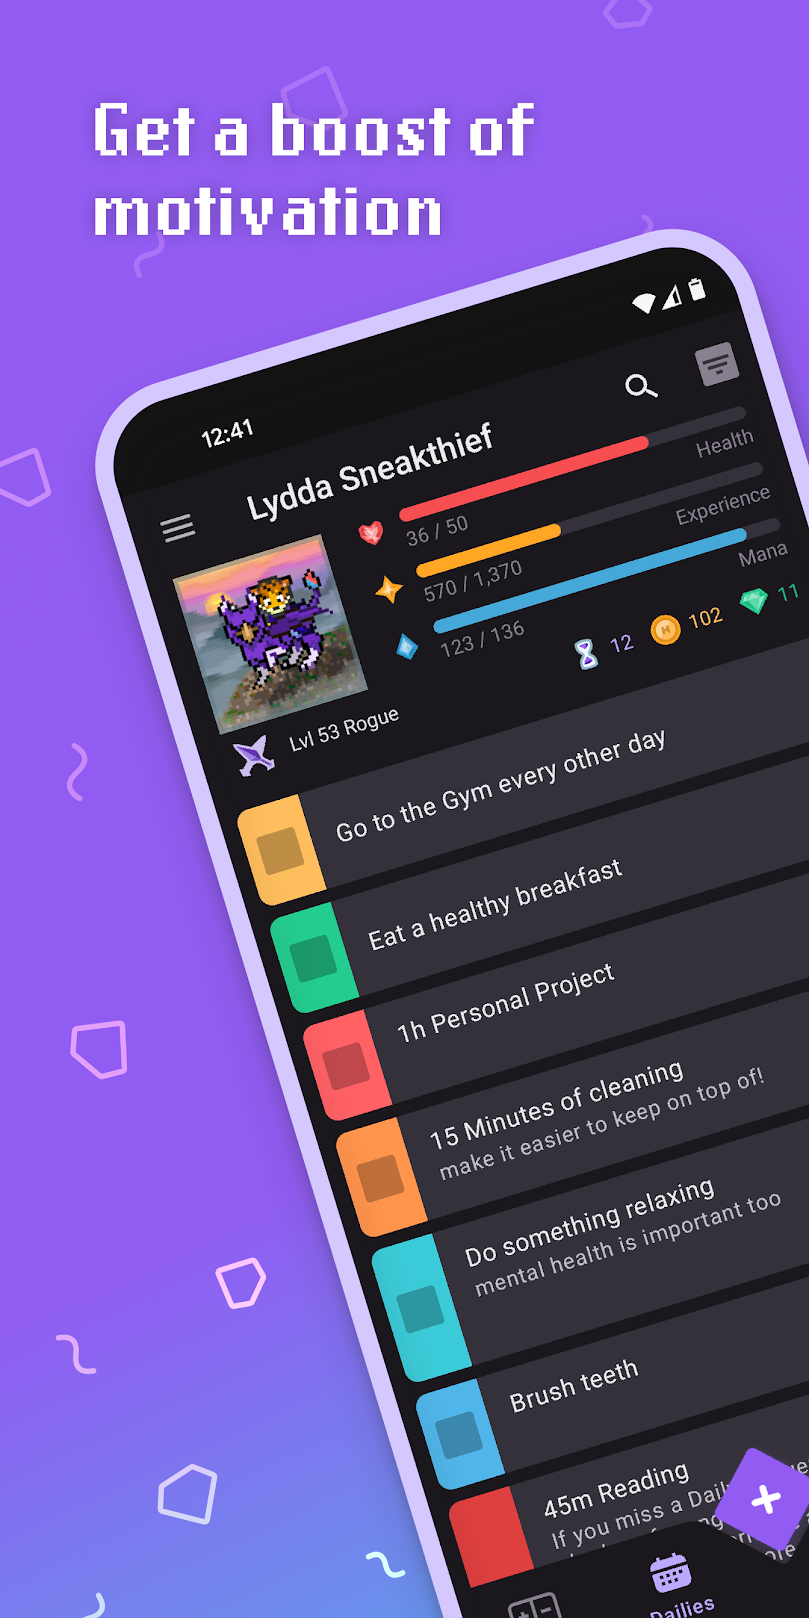 An app store listing screenshot for Habitica showing off some of its main features